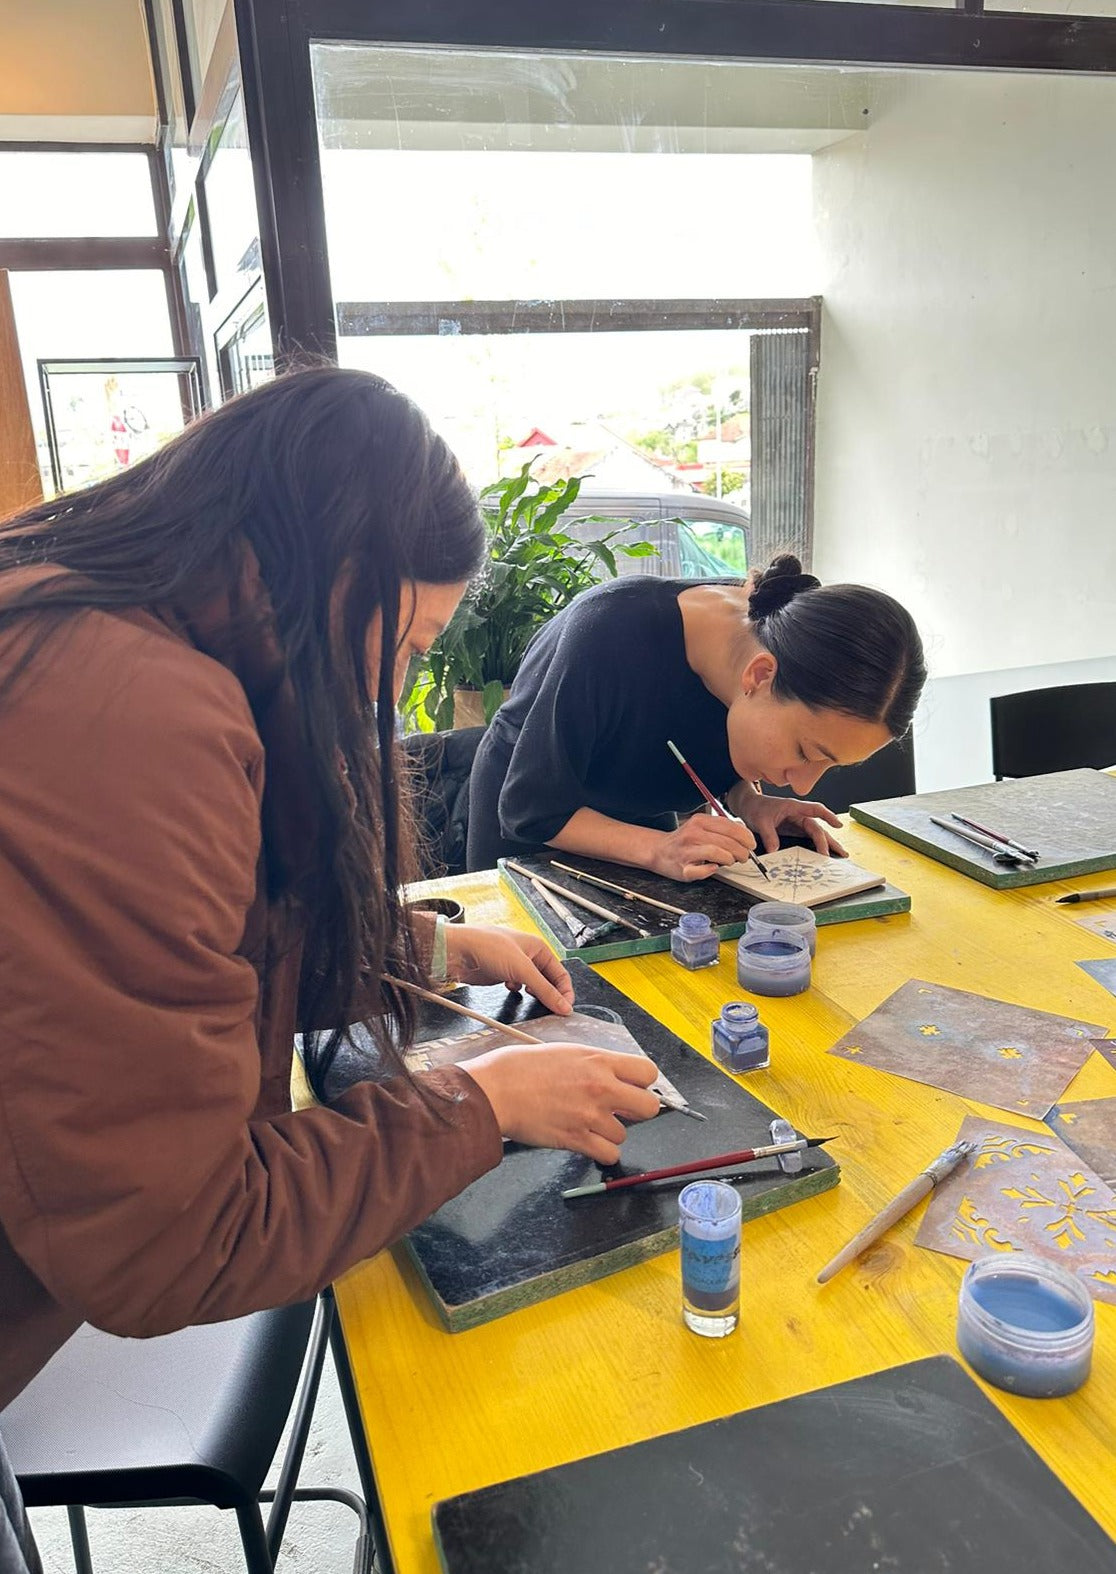 Tile Painting Workshop "Porto Tiles and Tea" with Francisco in Porto, Portugal by subcultours